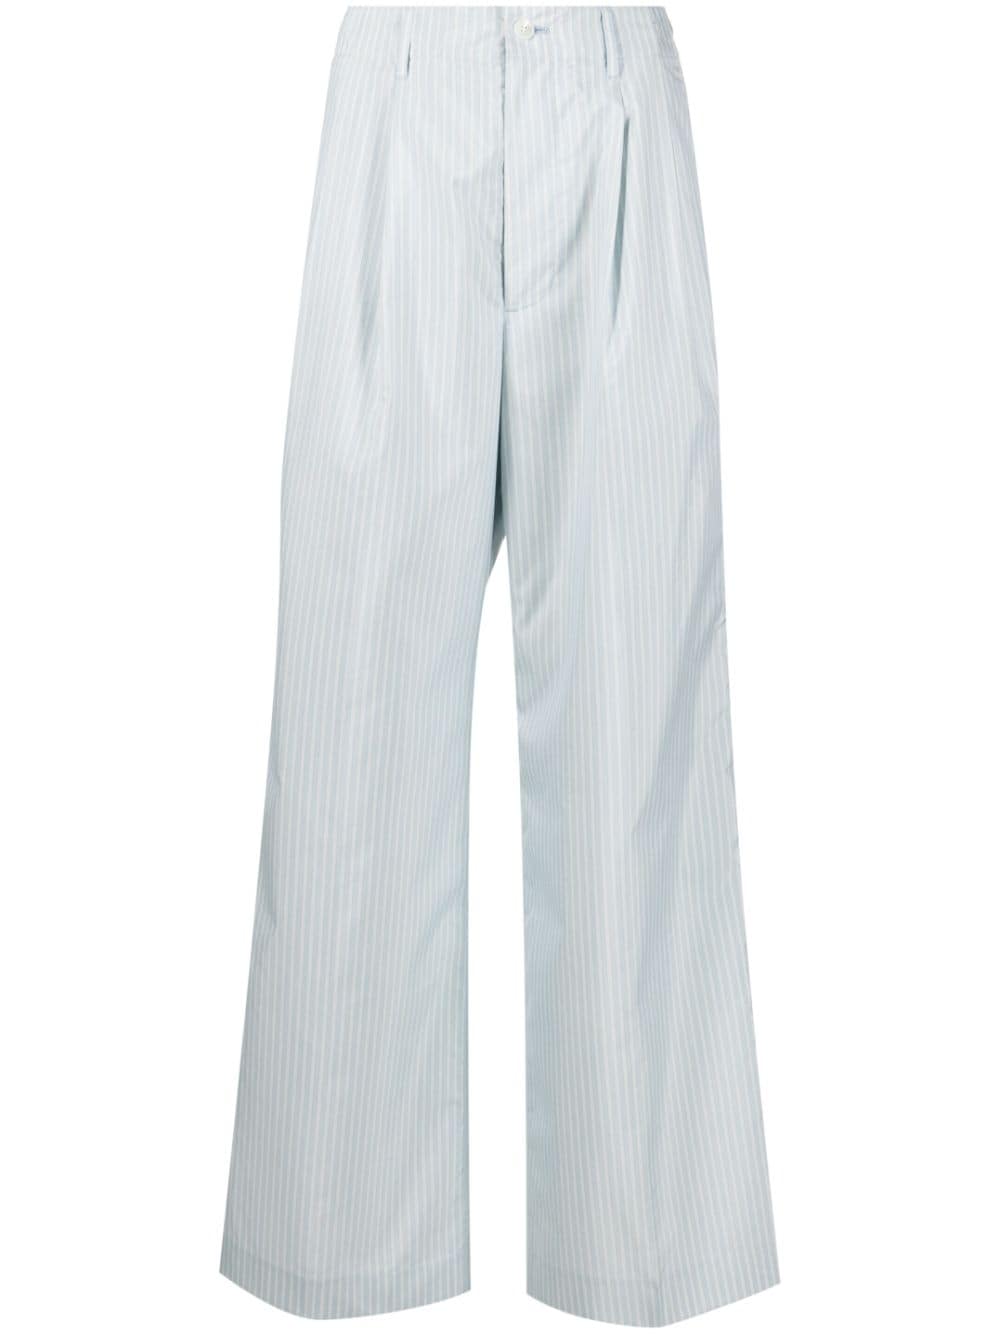 high-waist striped wide trousers